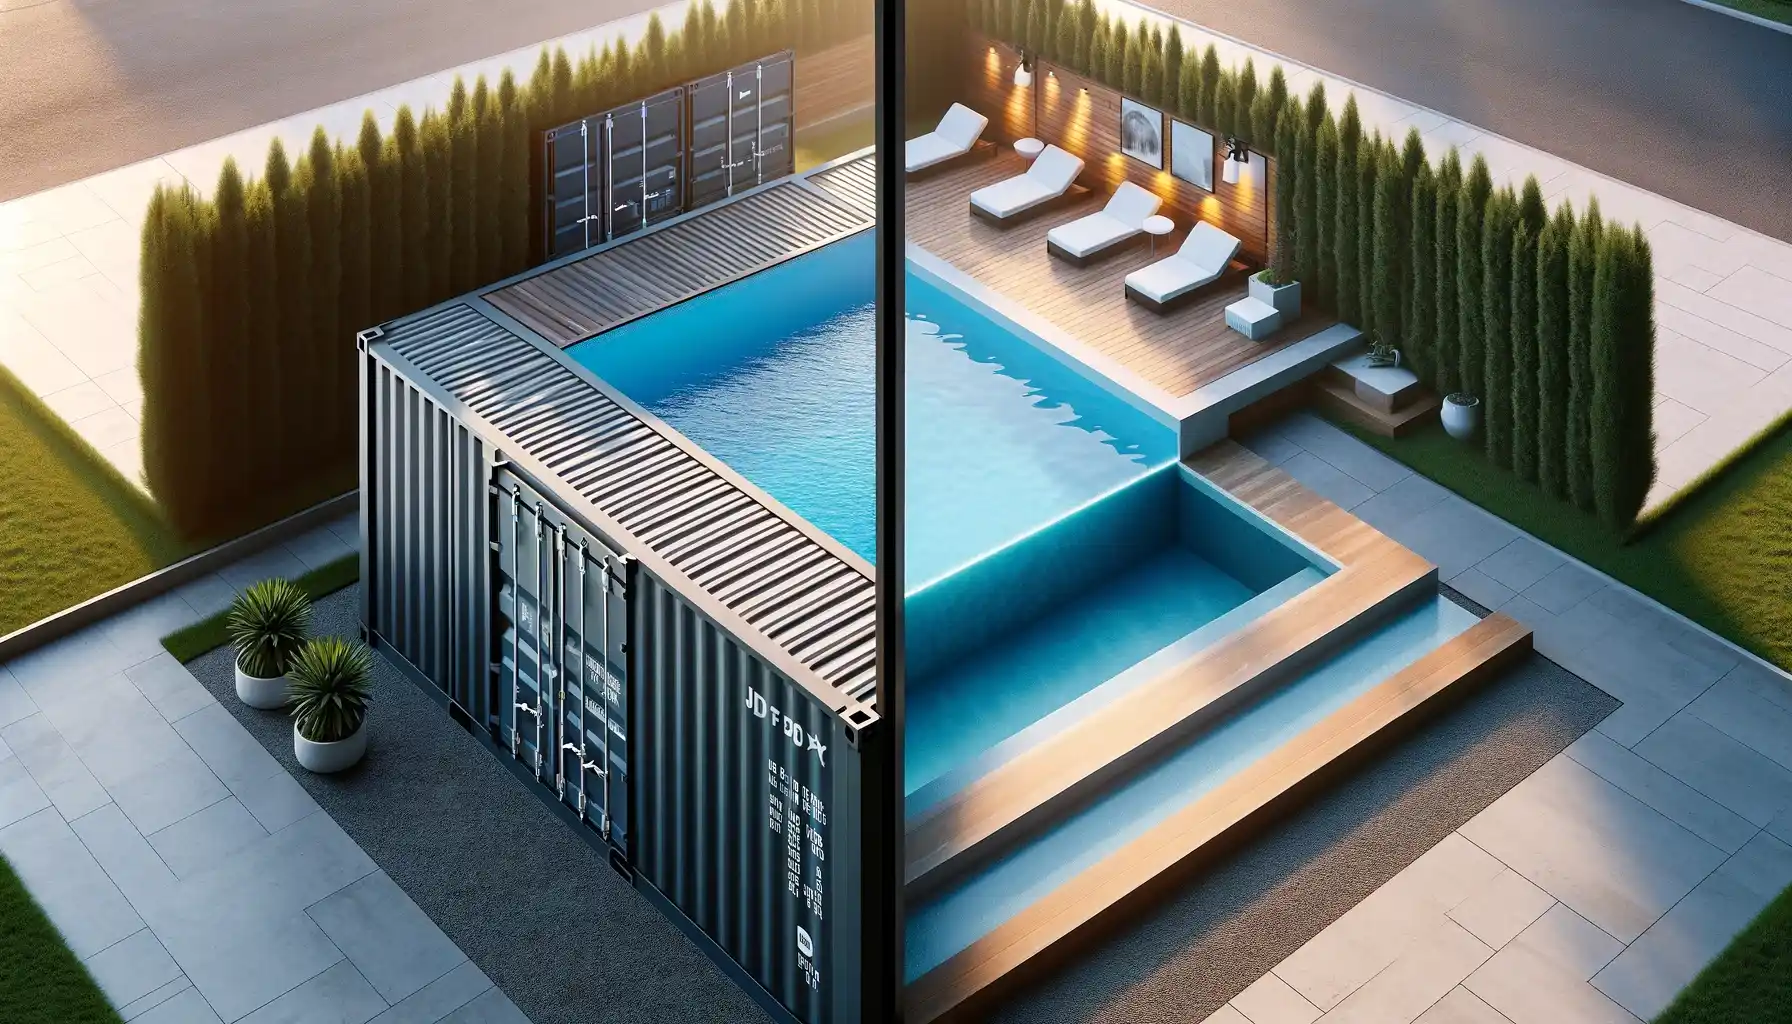 Shipping Container Pools or Fiberglass Pools: Who Wins?